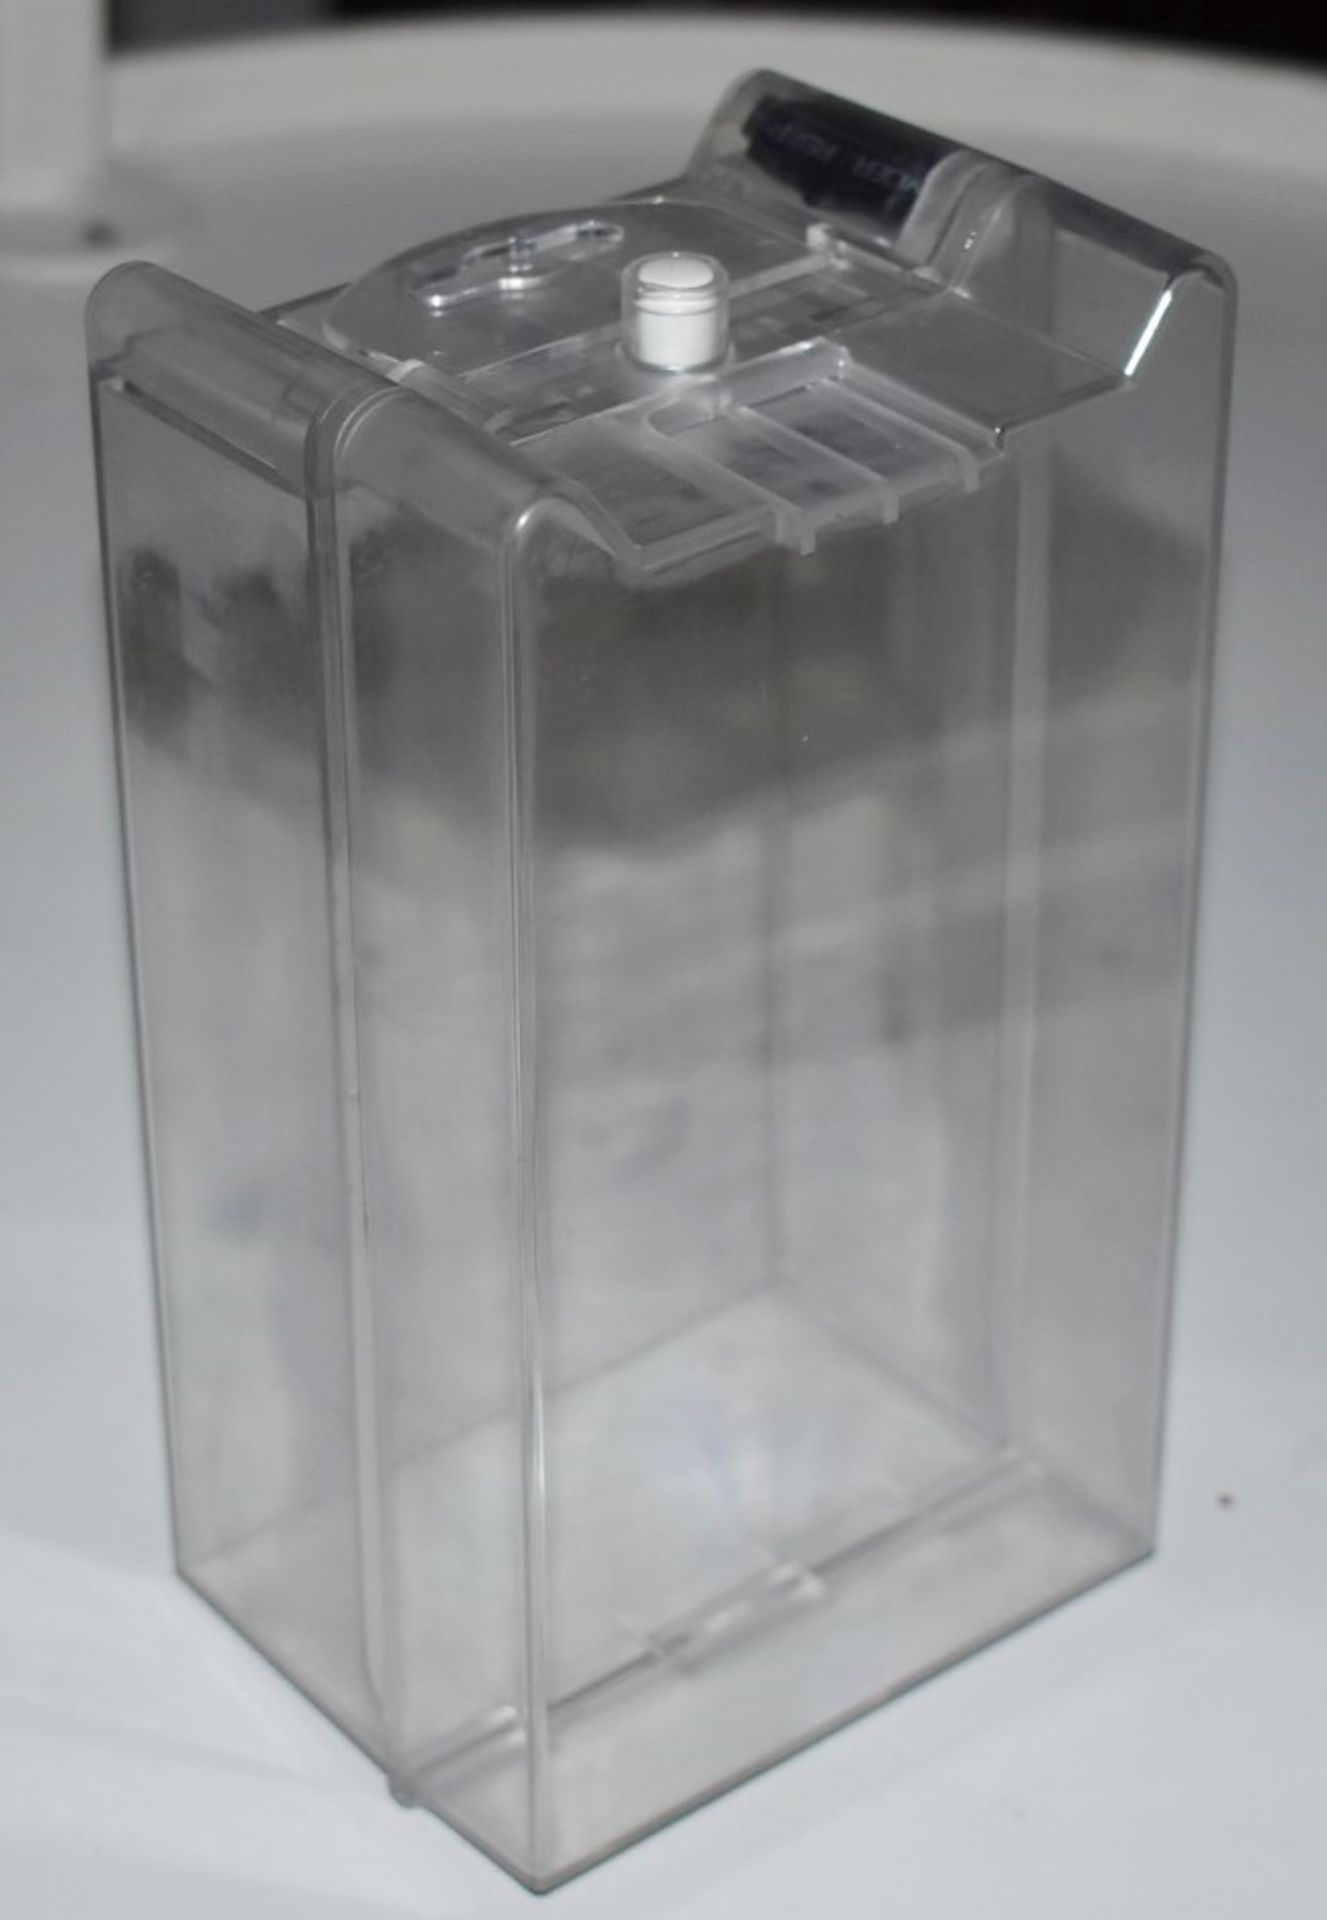 40 x Catalyst Clear Acrylic Retail Security Safer Cases With RF Tags and Hanging Tags - Brand New - Image 5 of 8